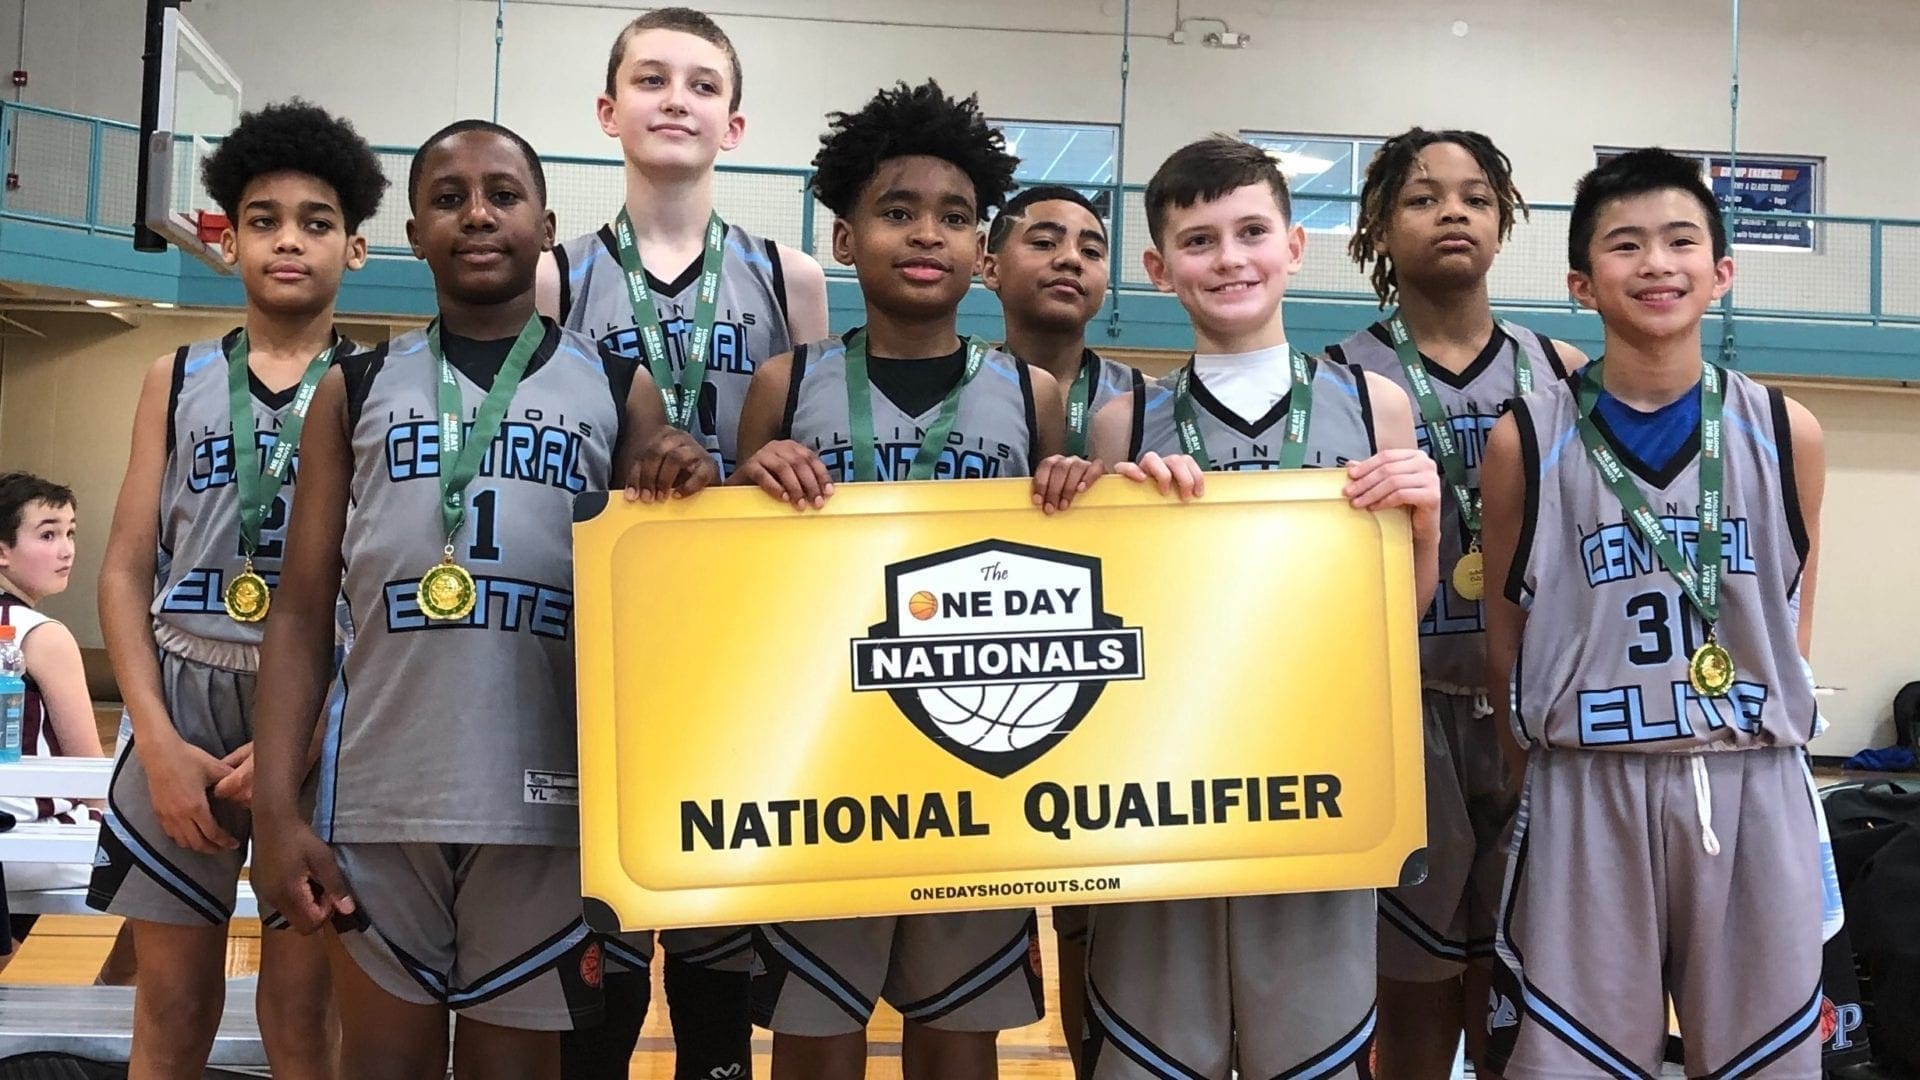 6th Grade Grey – Champions in 7th Grade Division in Super Bowl Shootout